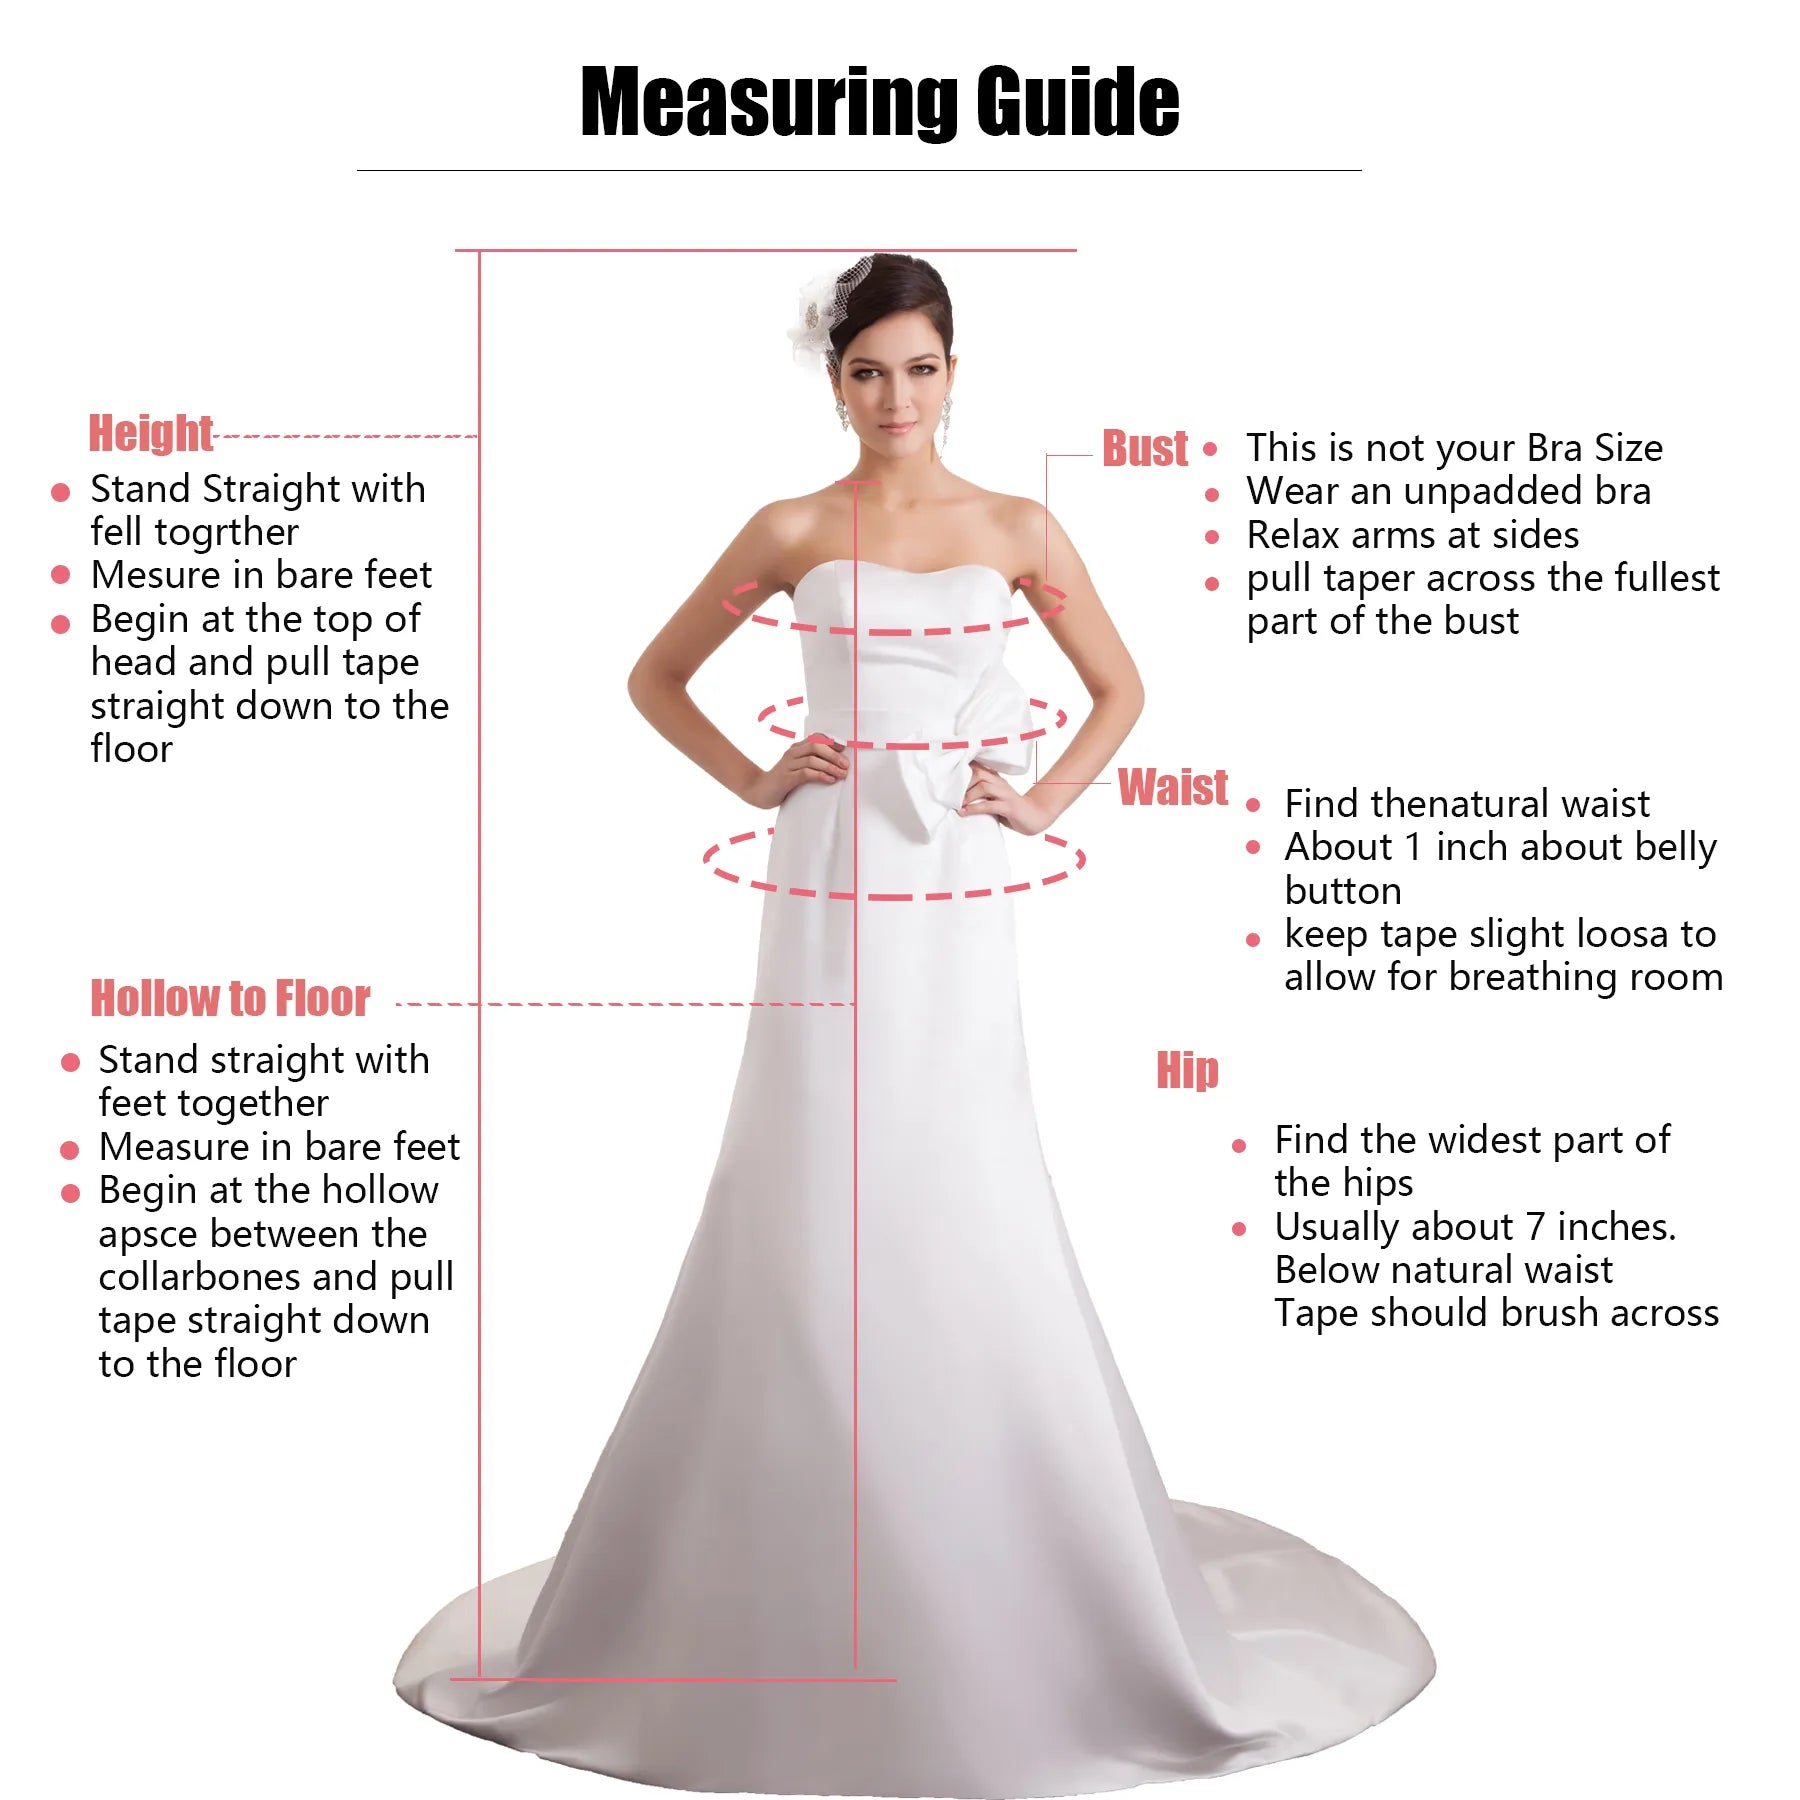 Pretty Wedding Dresses For Women Vintage A Line Sexy Mermaid Off Shoulder Sleeveless Romantic Fluffy Princess Style Bridal Gowns